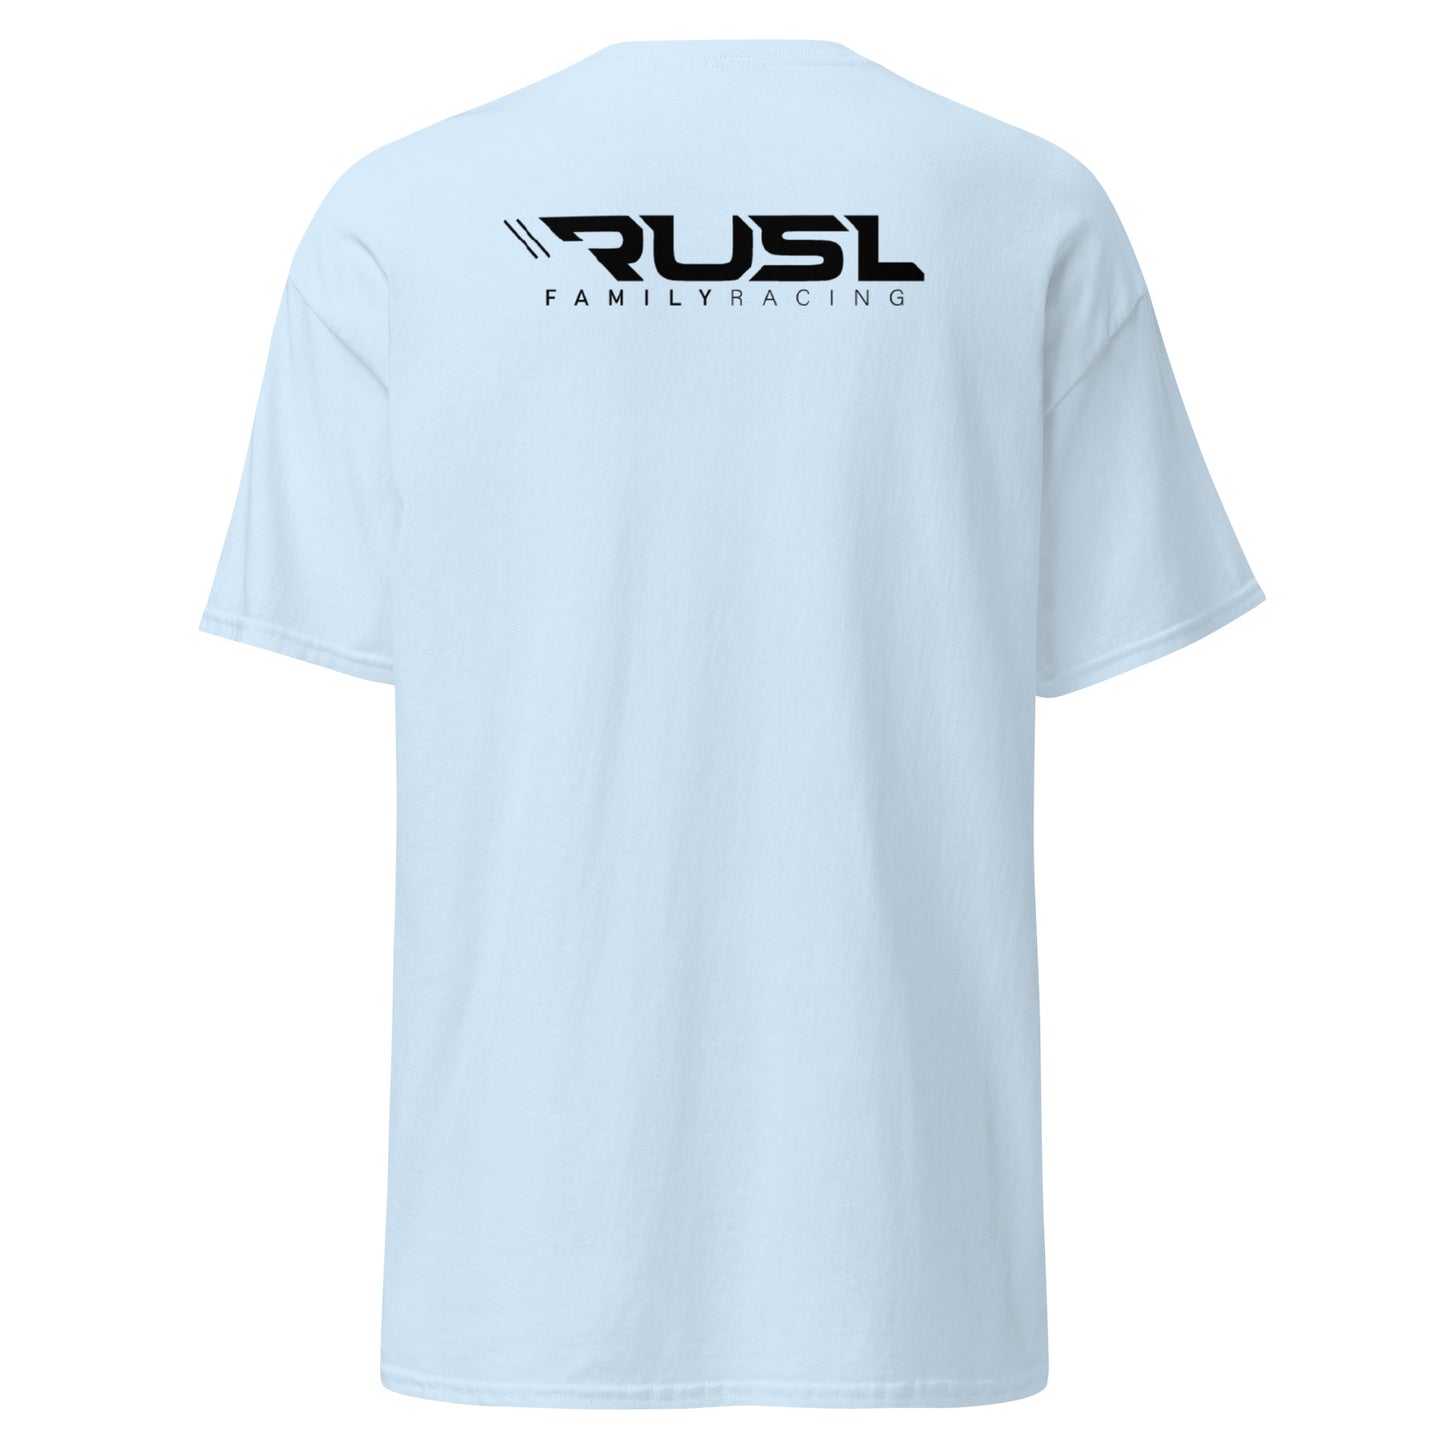 Russell Family Racing T-Shirt